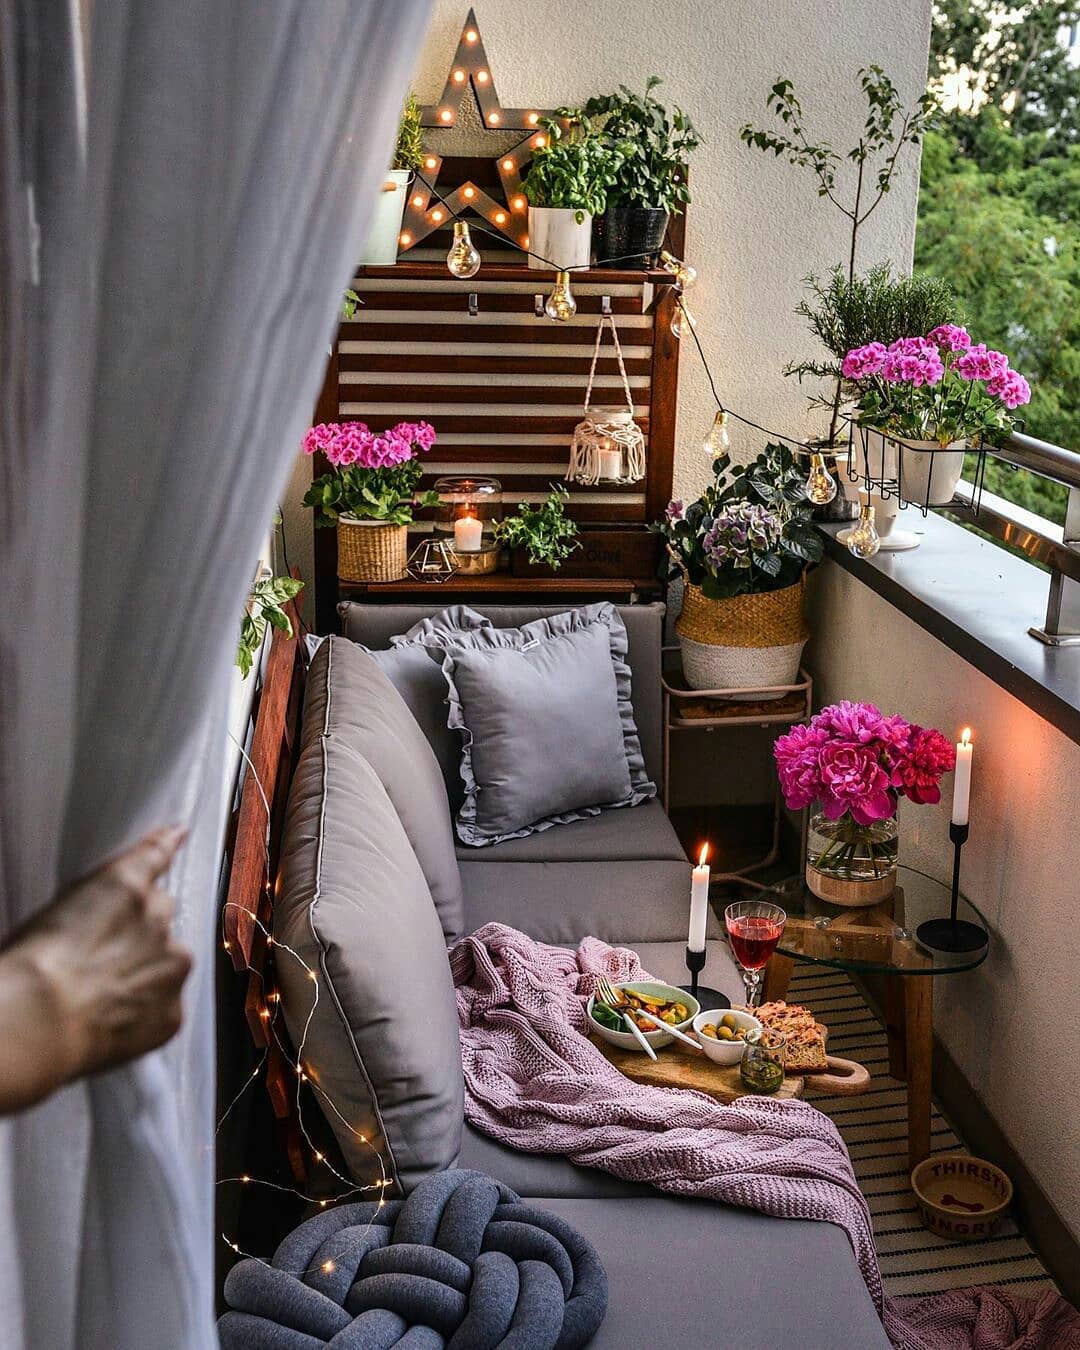 40 Cozy Balcony Ideas and Decor Inspiration 2019 - Page 23 of 41 - My Blog